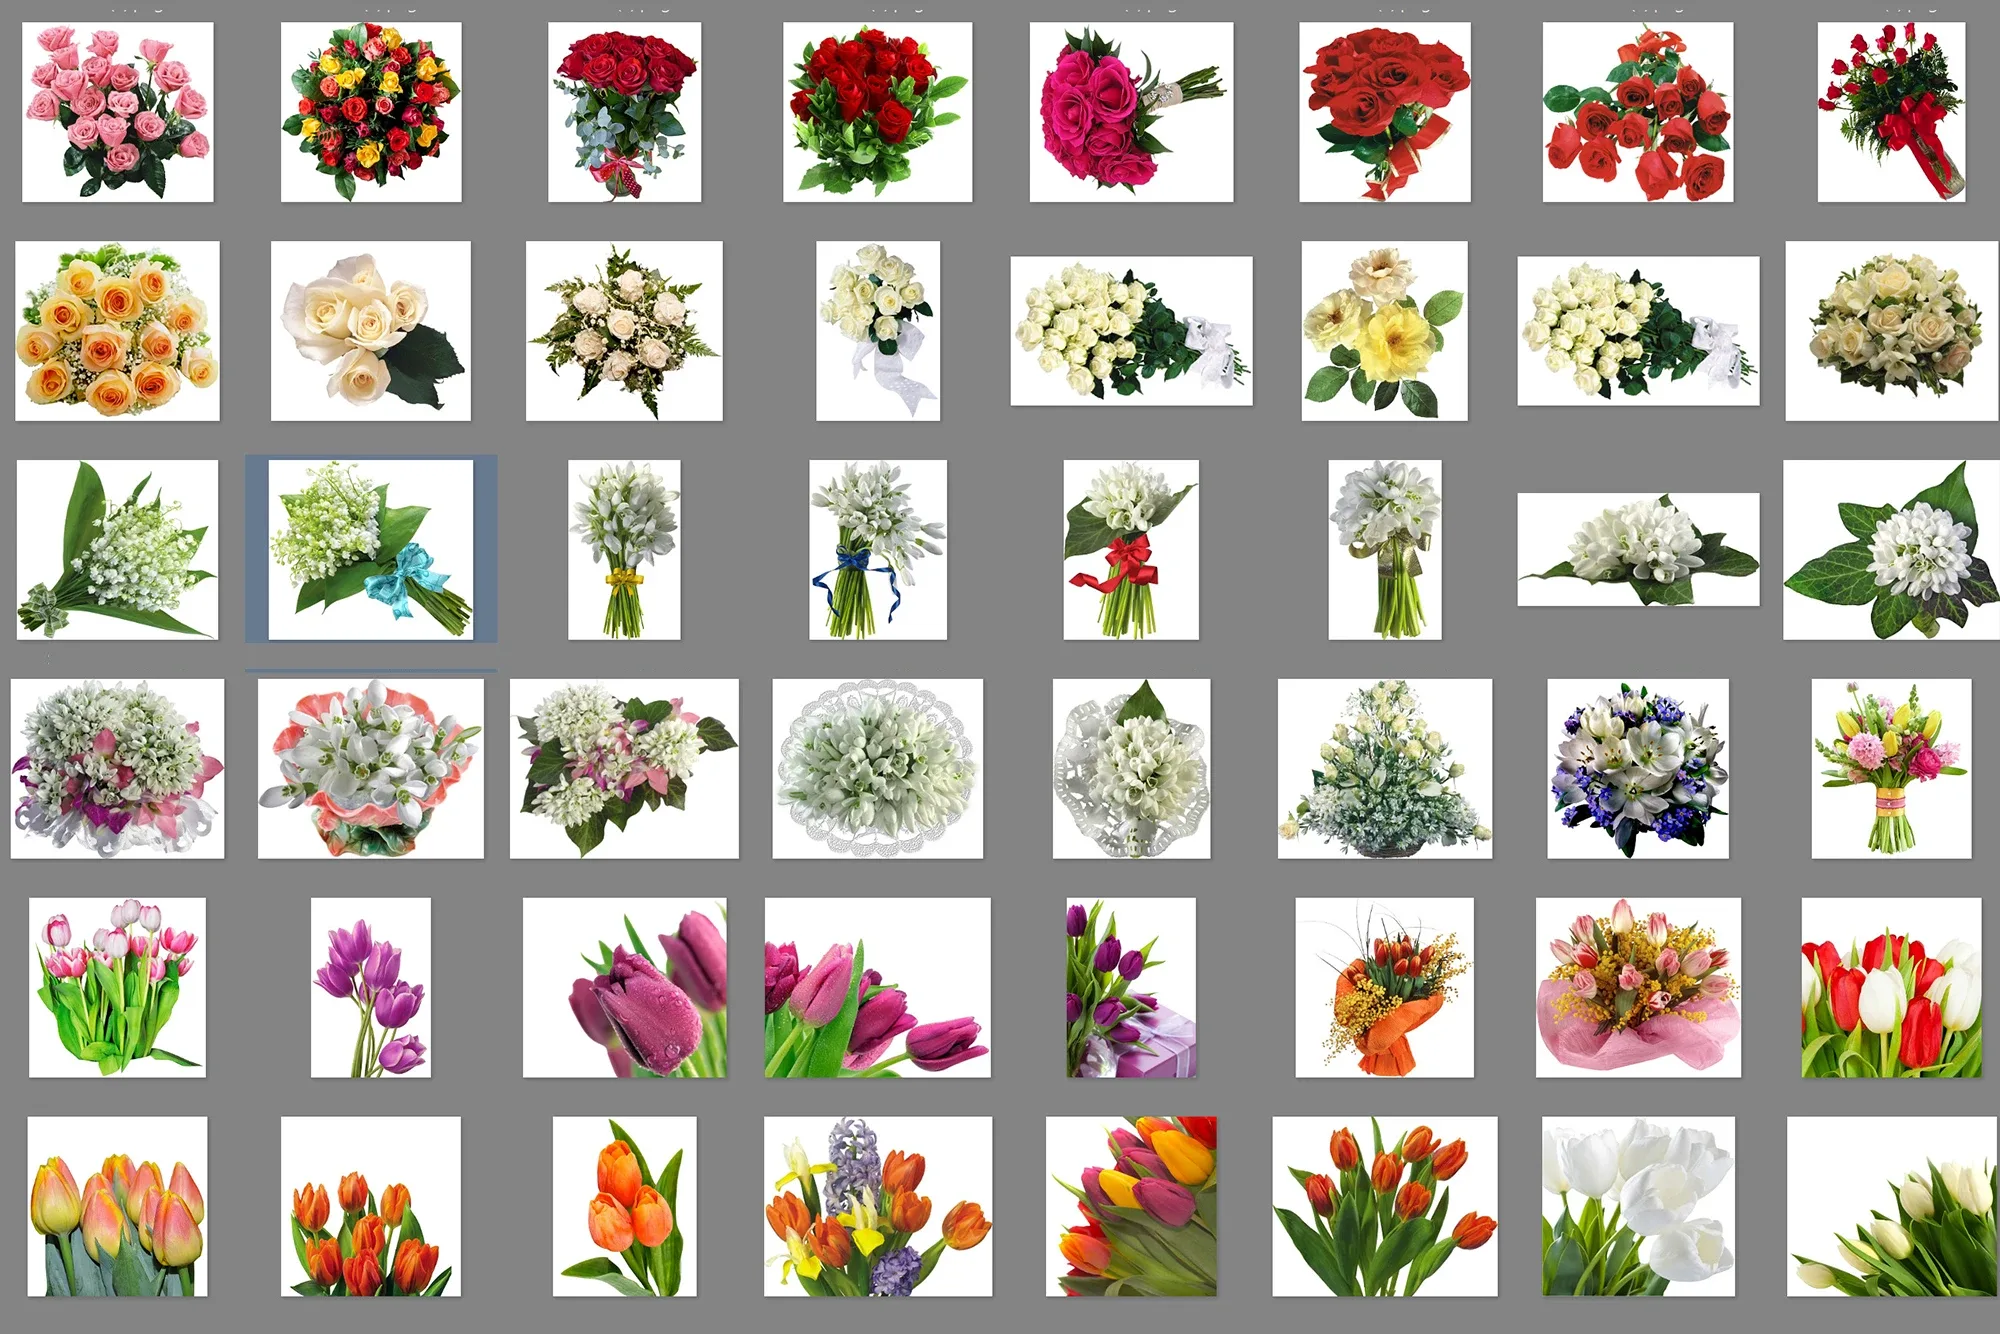 75 Flower Bouquets, Digital Spring Bouquet, Rose flower Clip Art, Floral season, Tulip real flowers, Snowdrop Photoshop overlays, PNG files